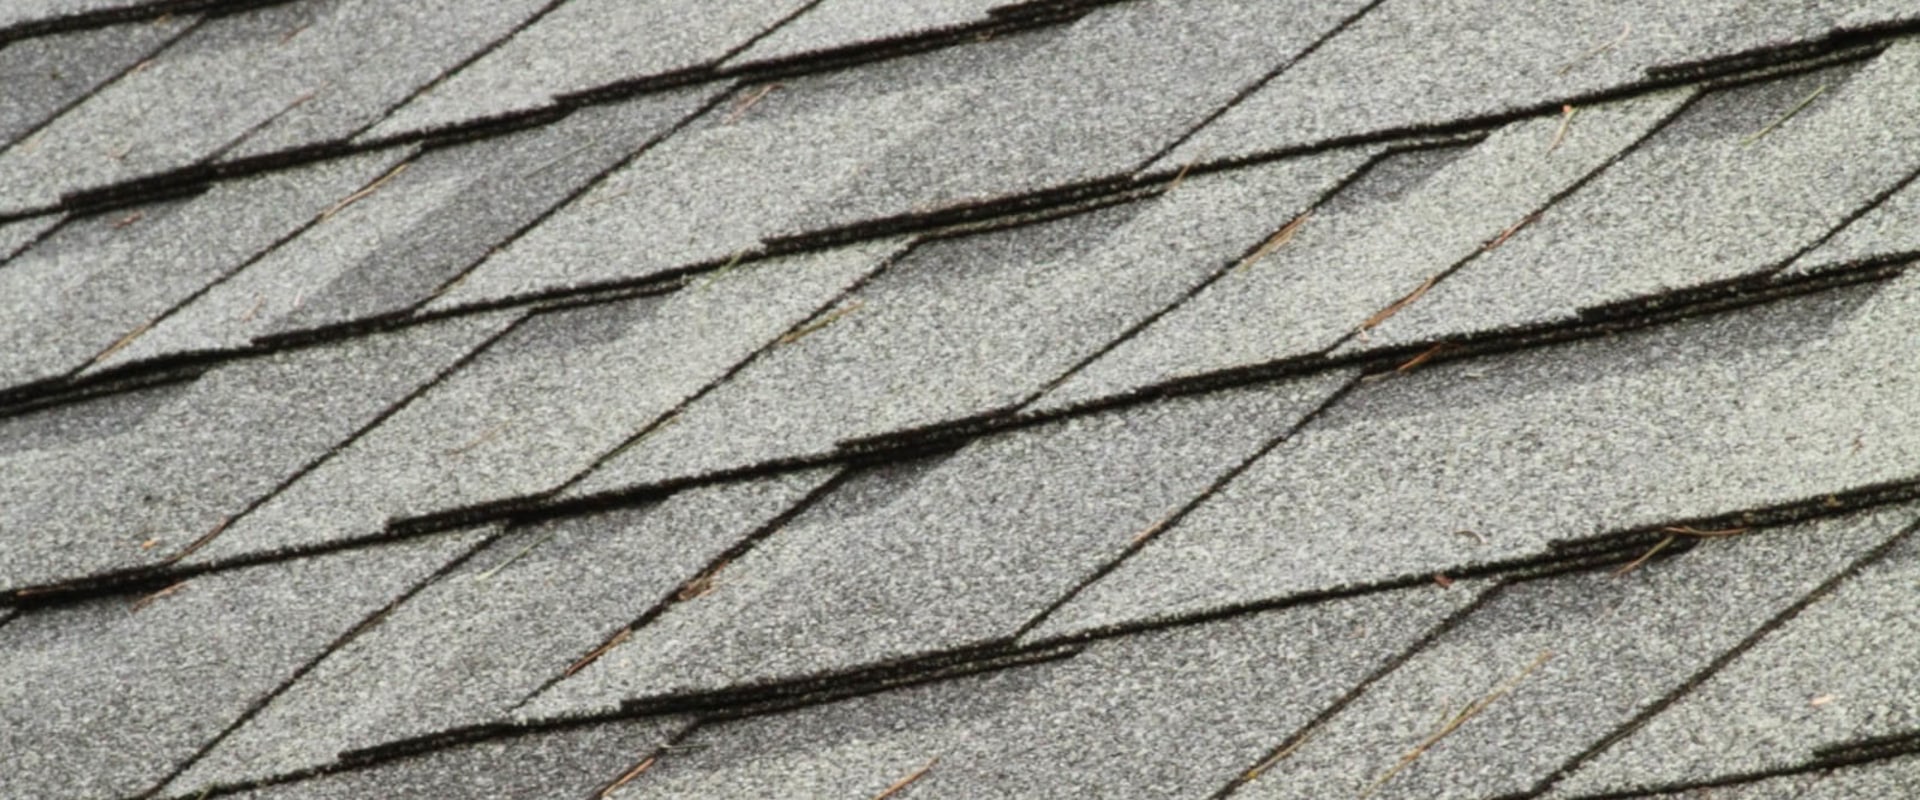 Which roofing design is the most hurricane resistant?